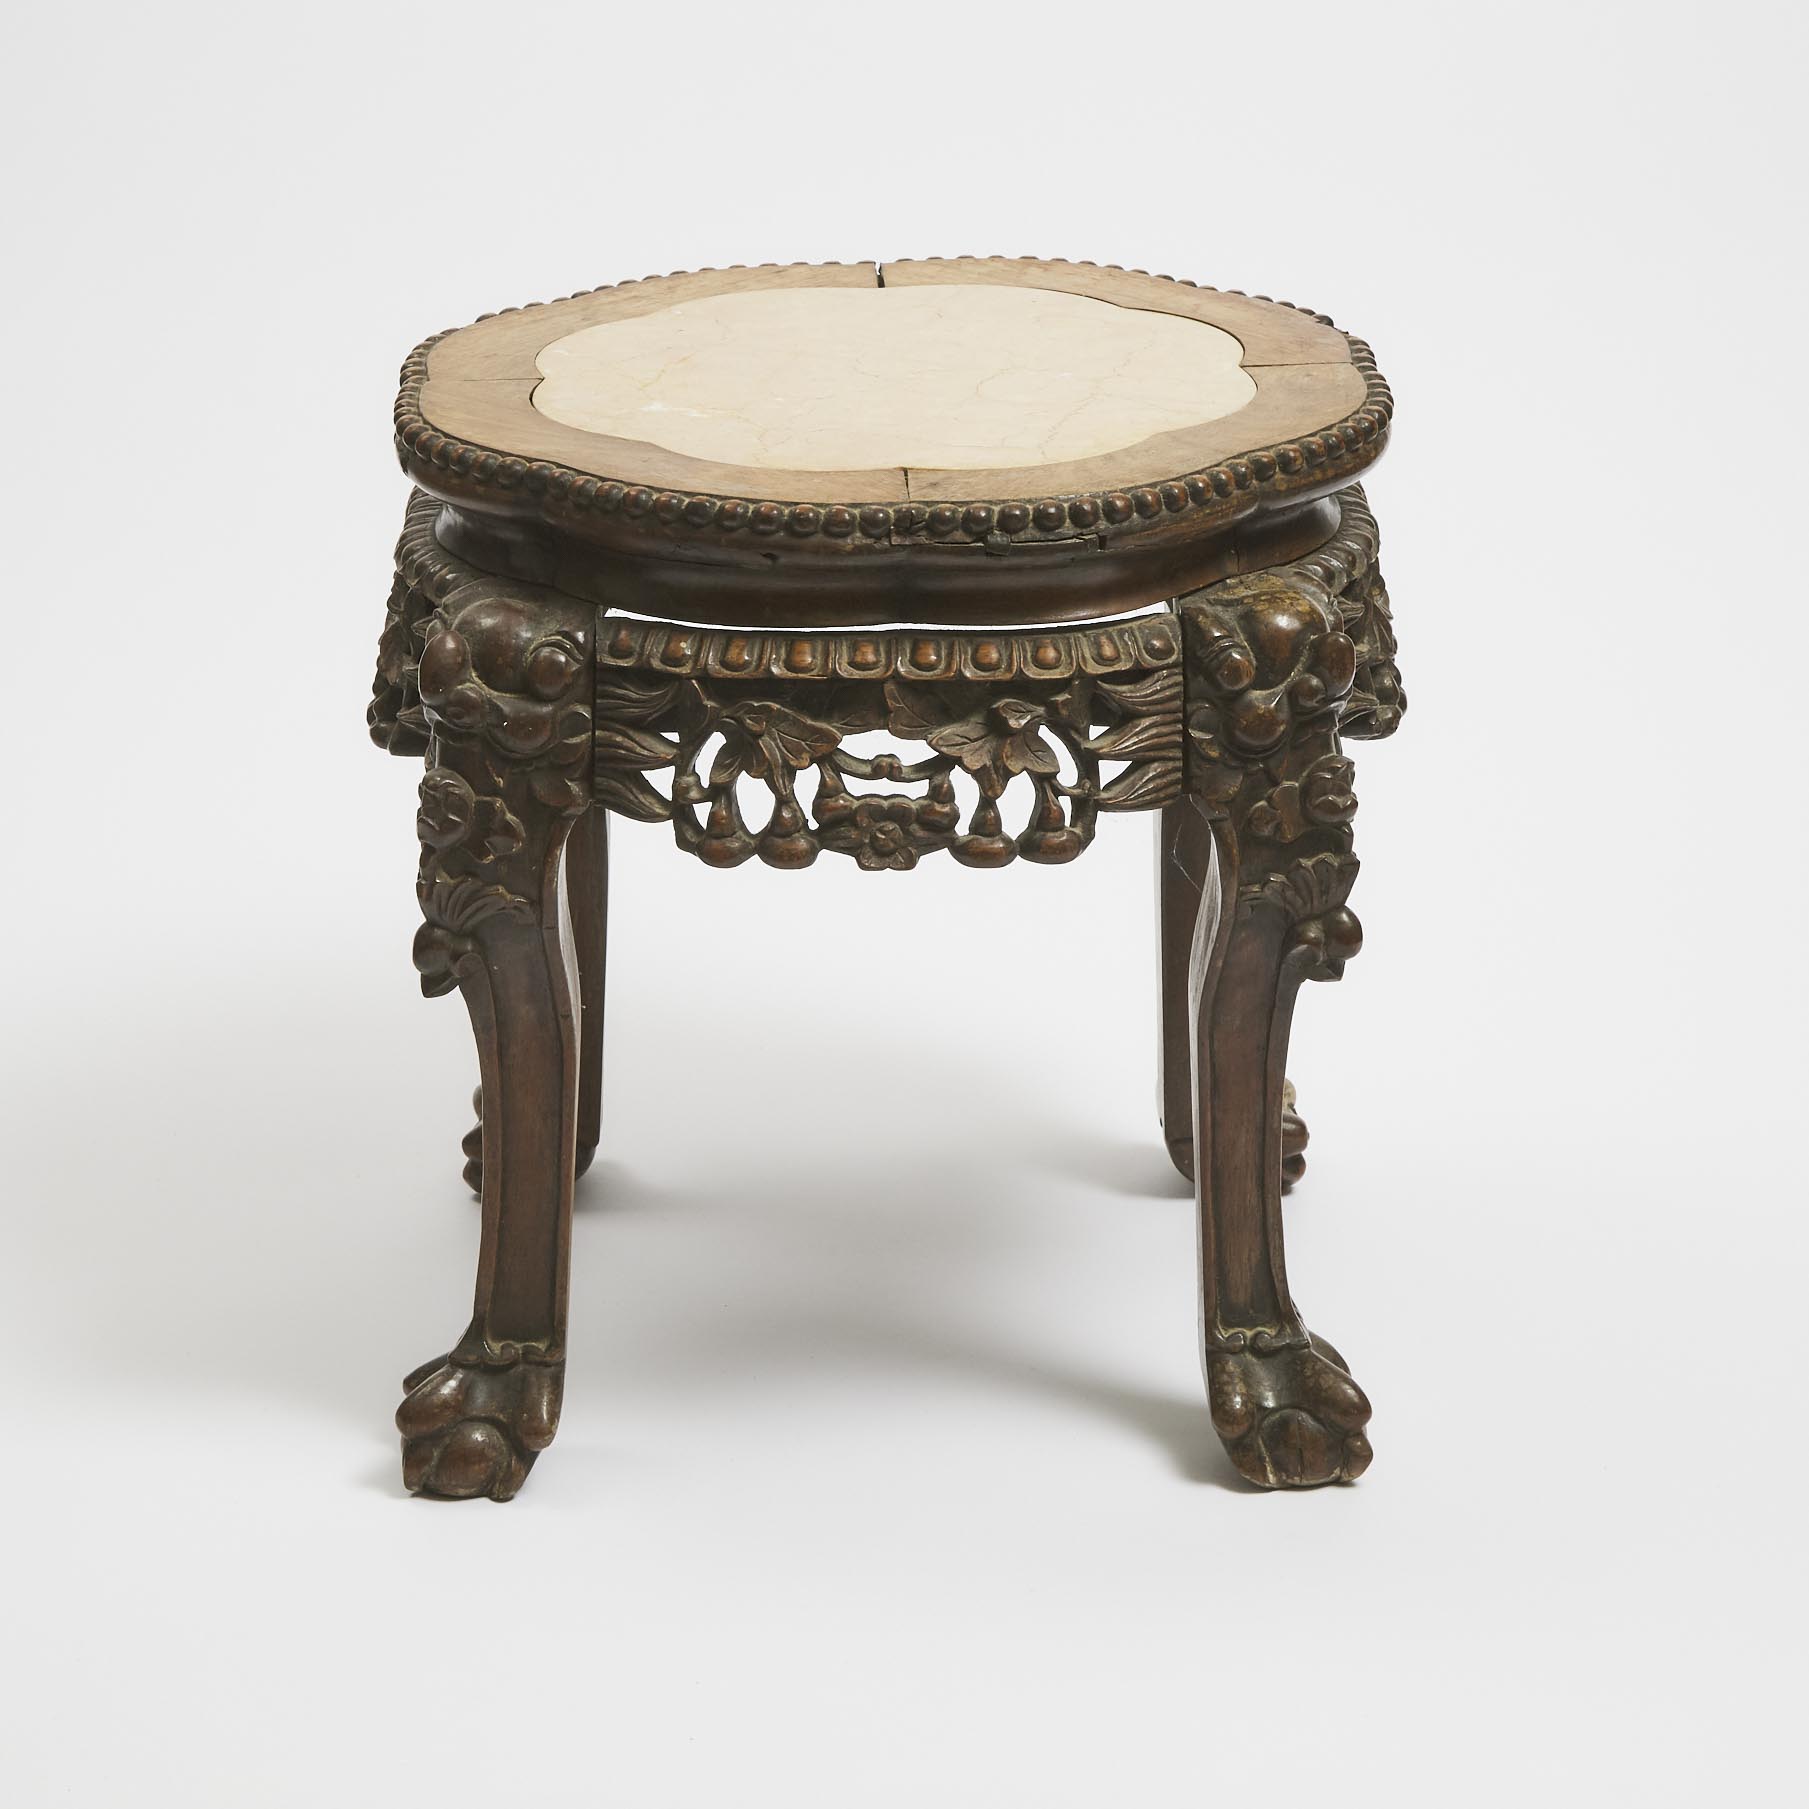 A Chinese Marble-Inset Hardwood Stand, Early to Mid 20th Century